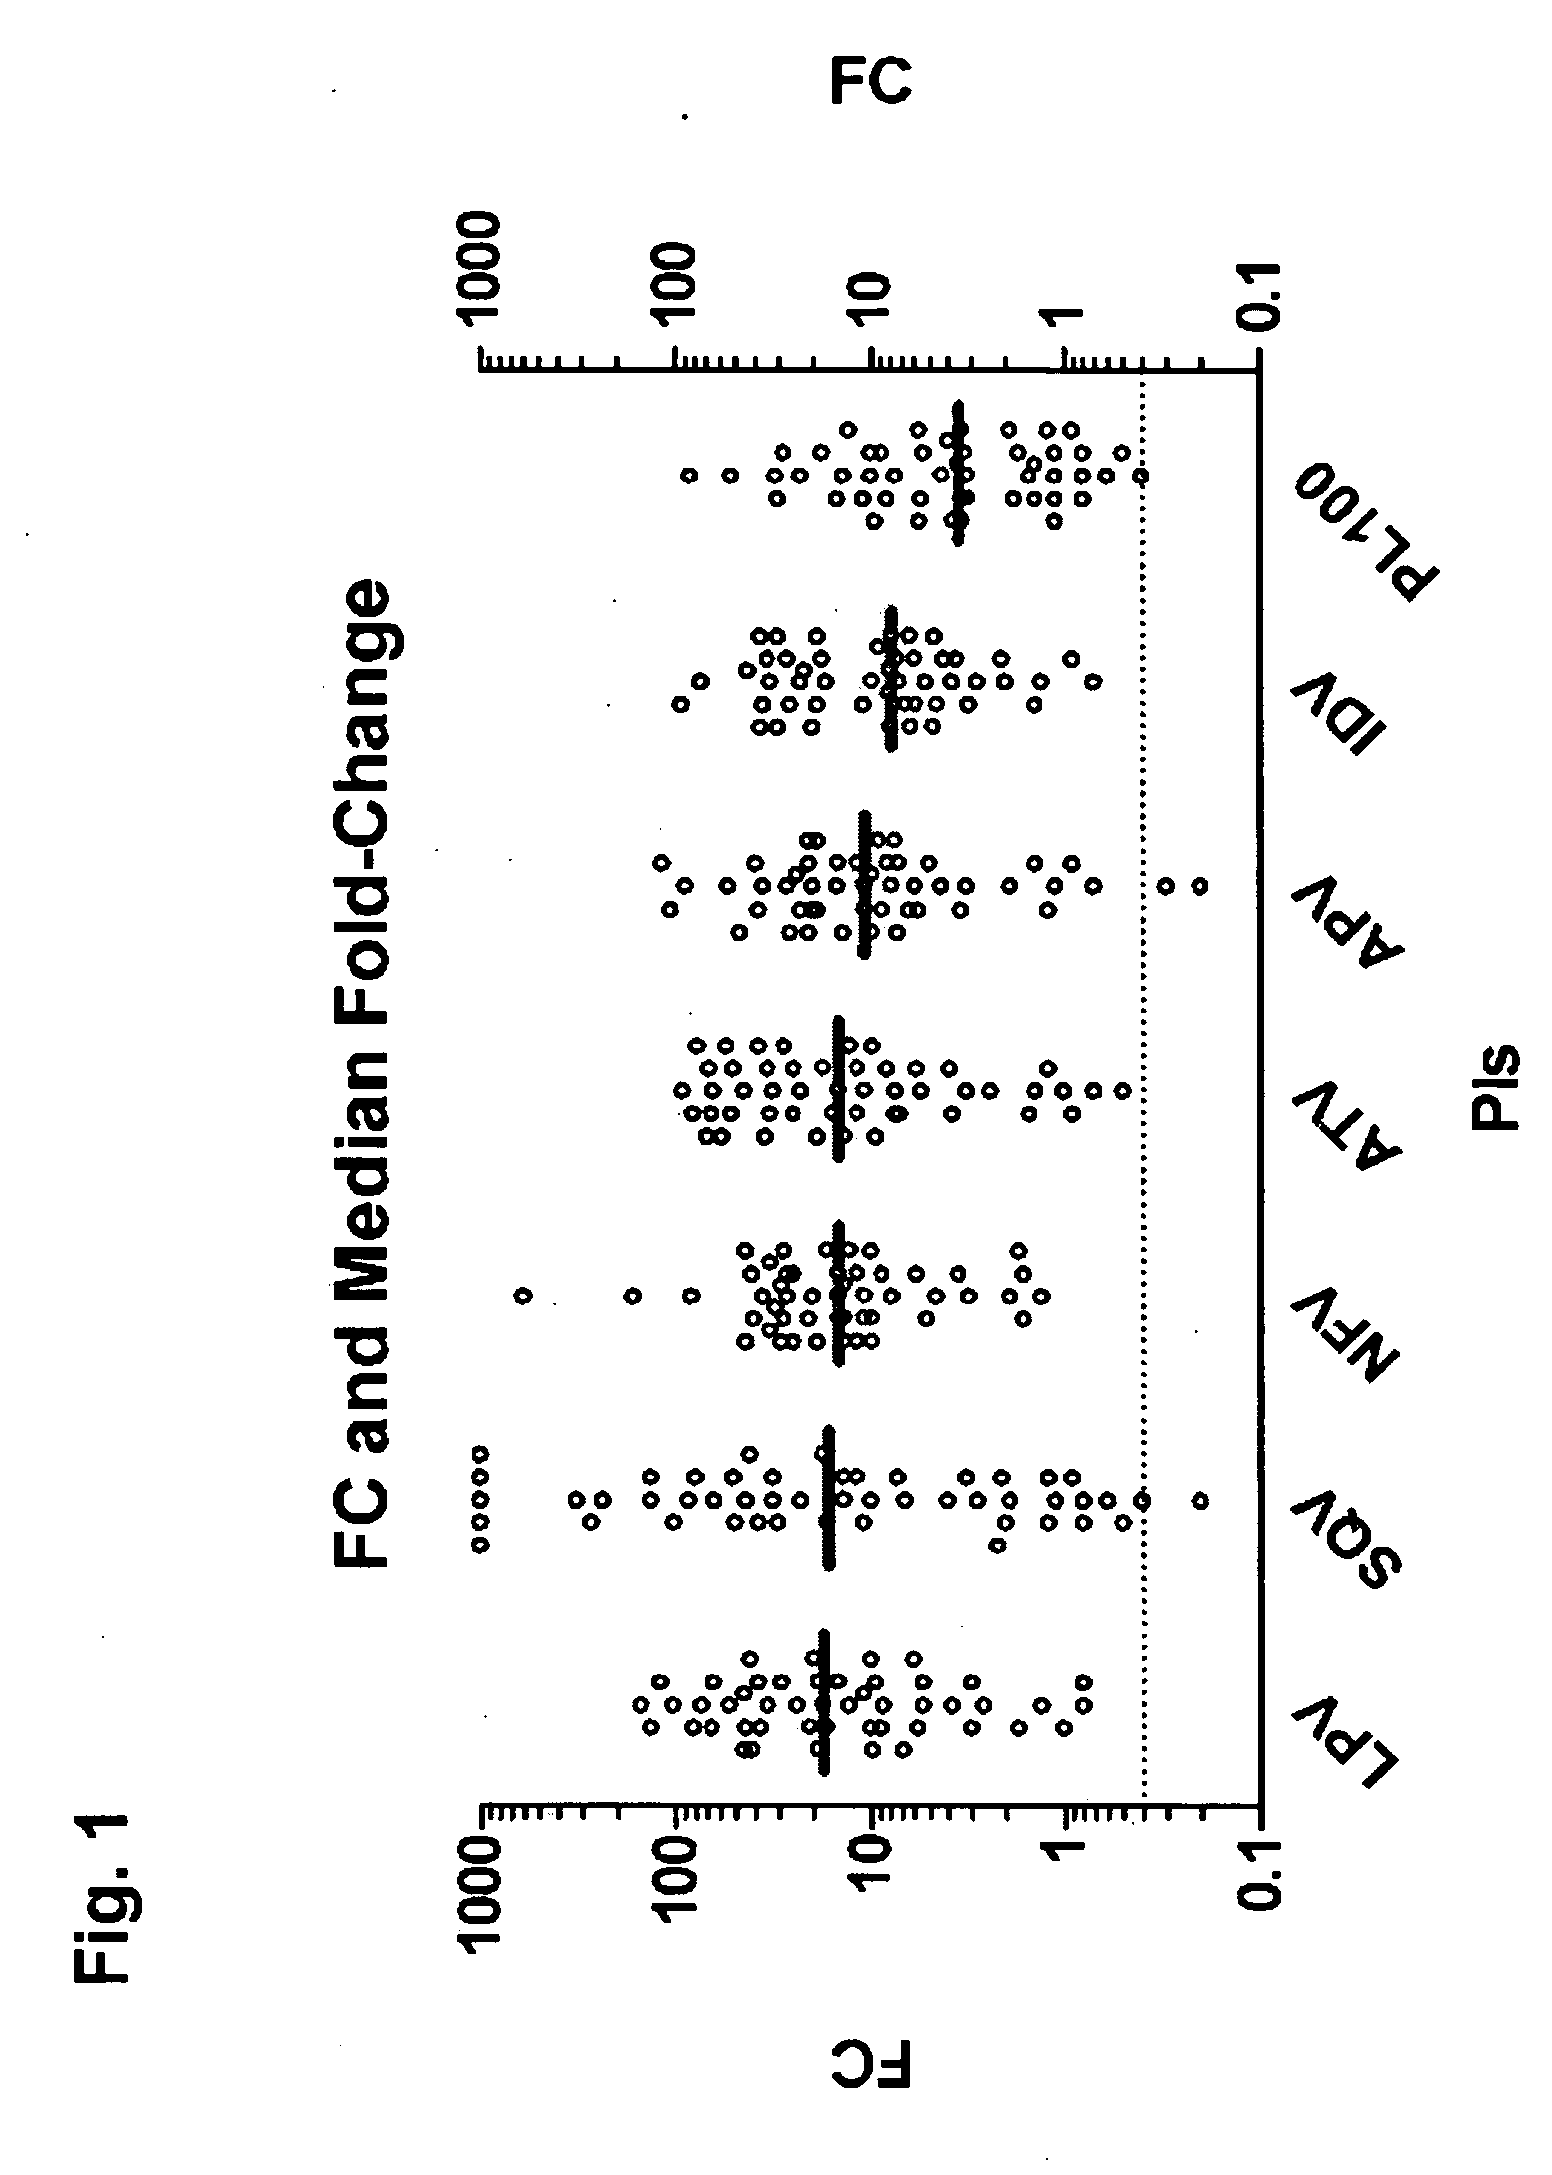 Method for improving pharmacokinetics of protease inhibitors and protease inhibitor precursors